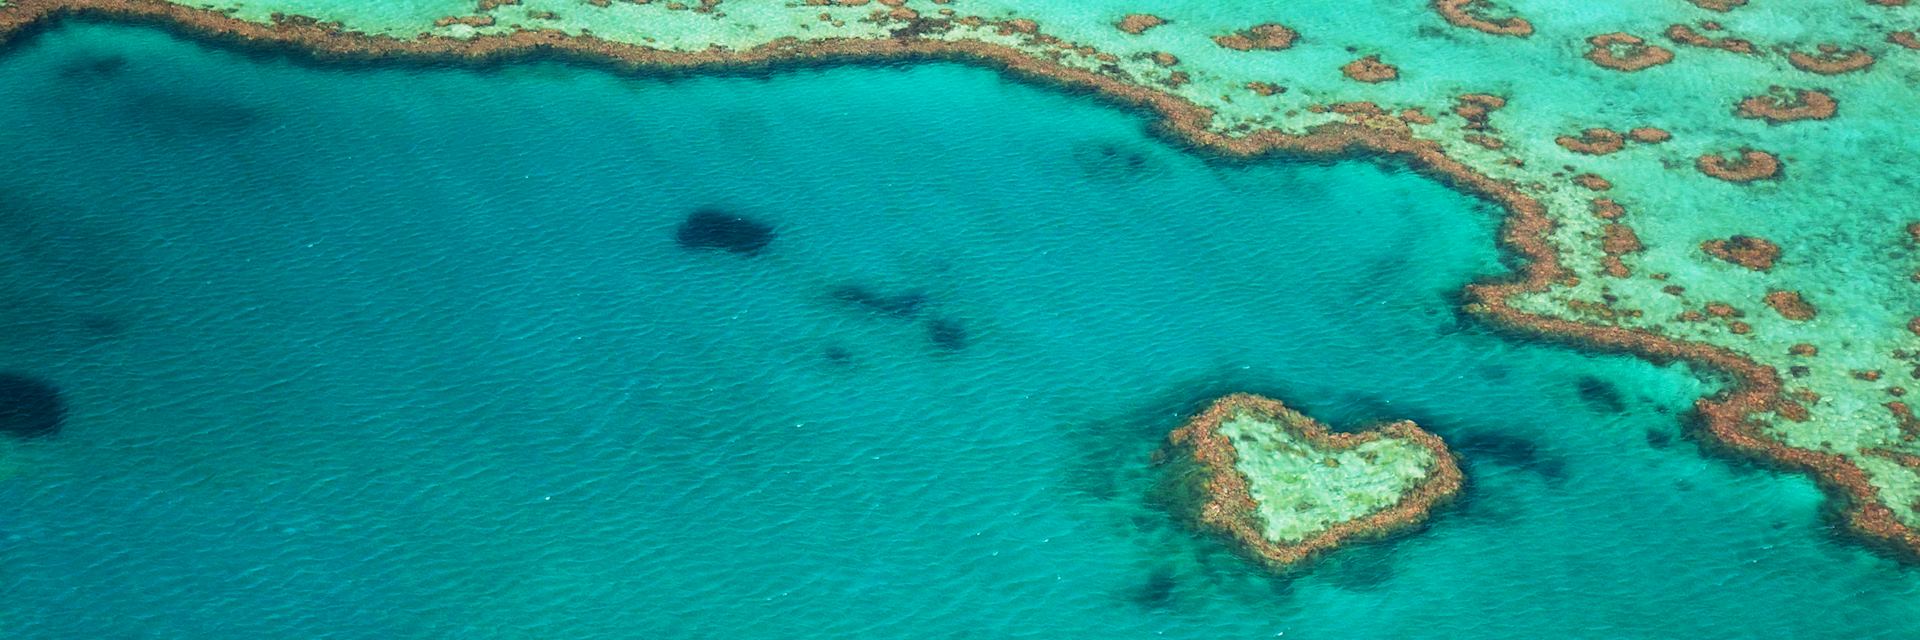 Visit The Great Barrier Reef, Australia | Audley Travel UK